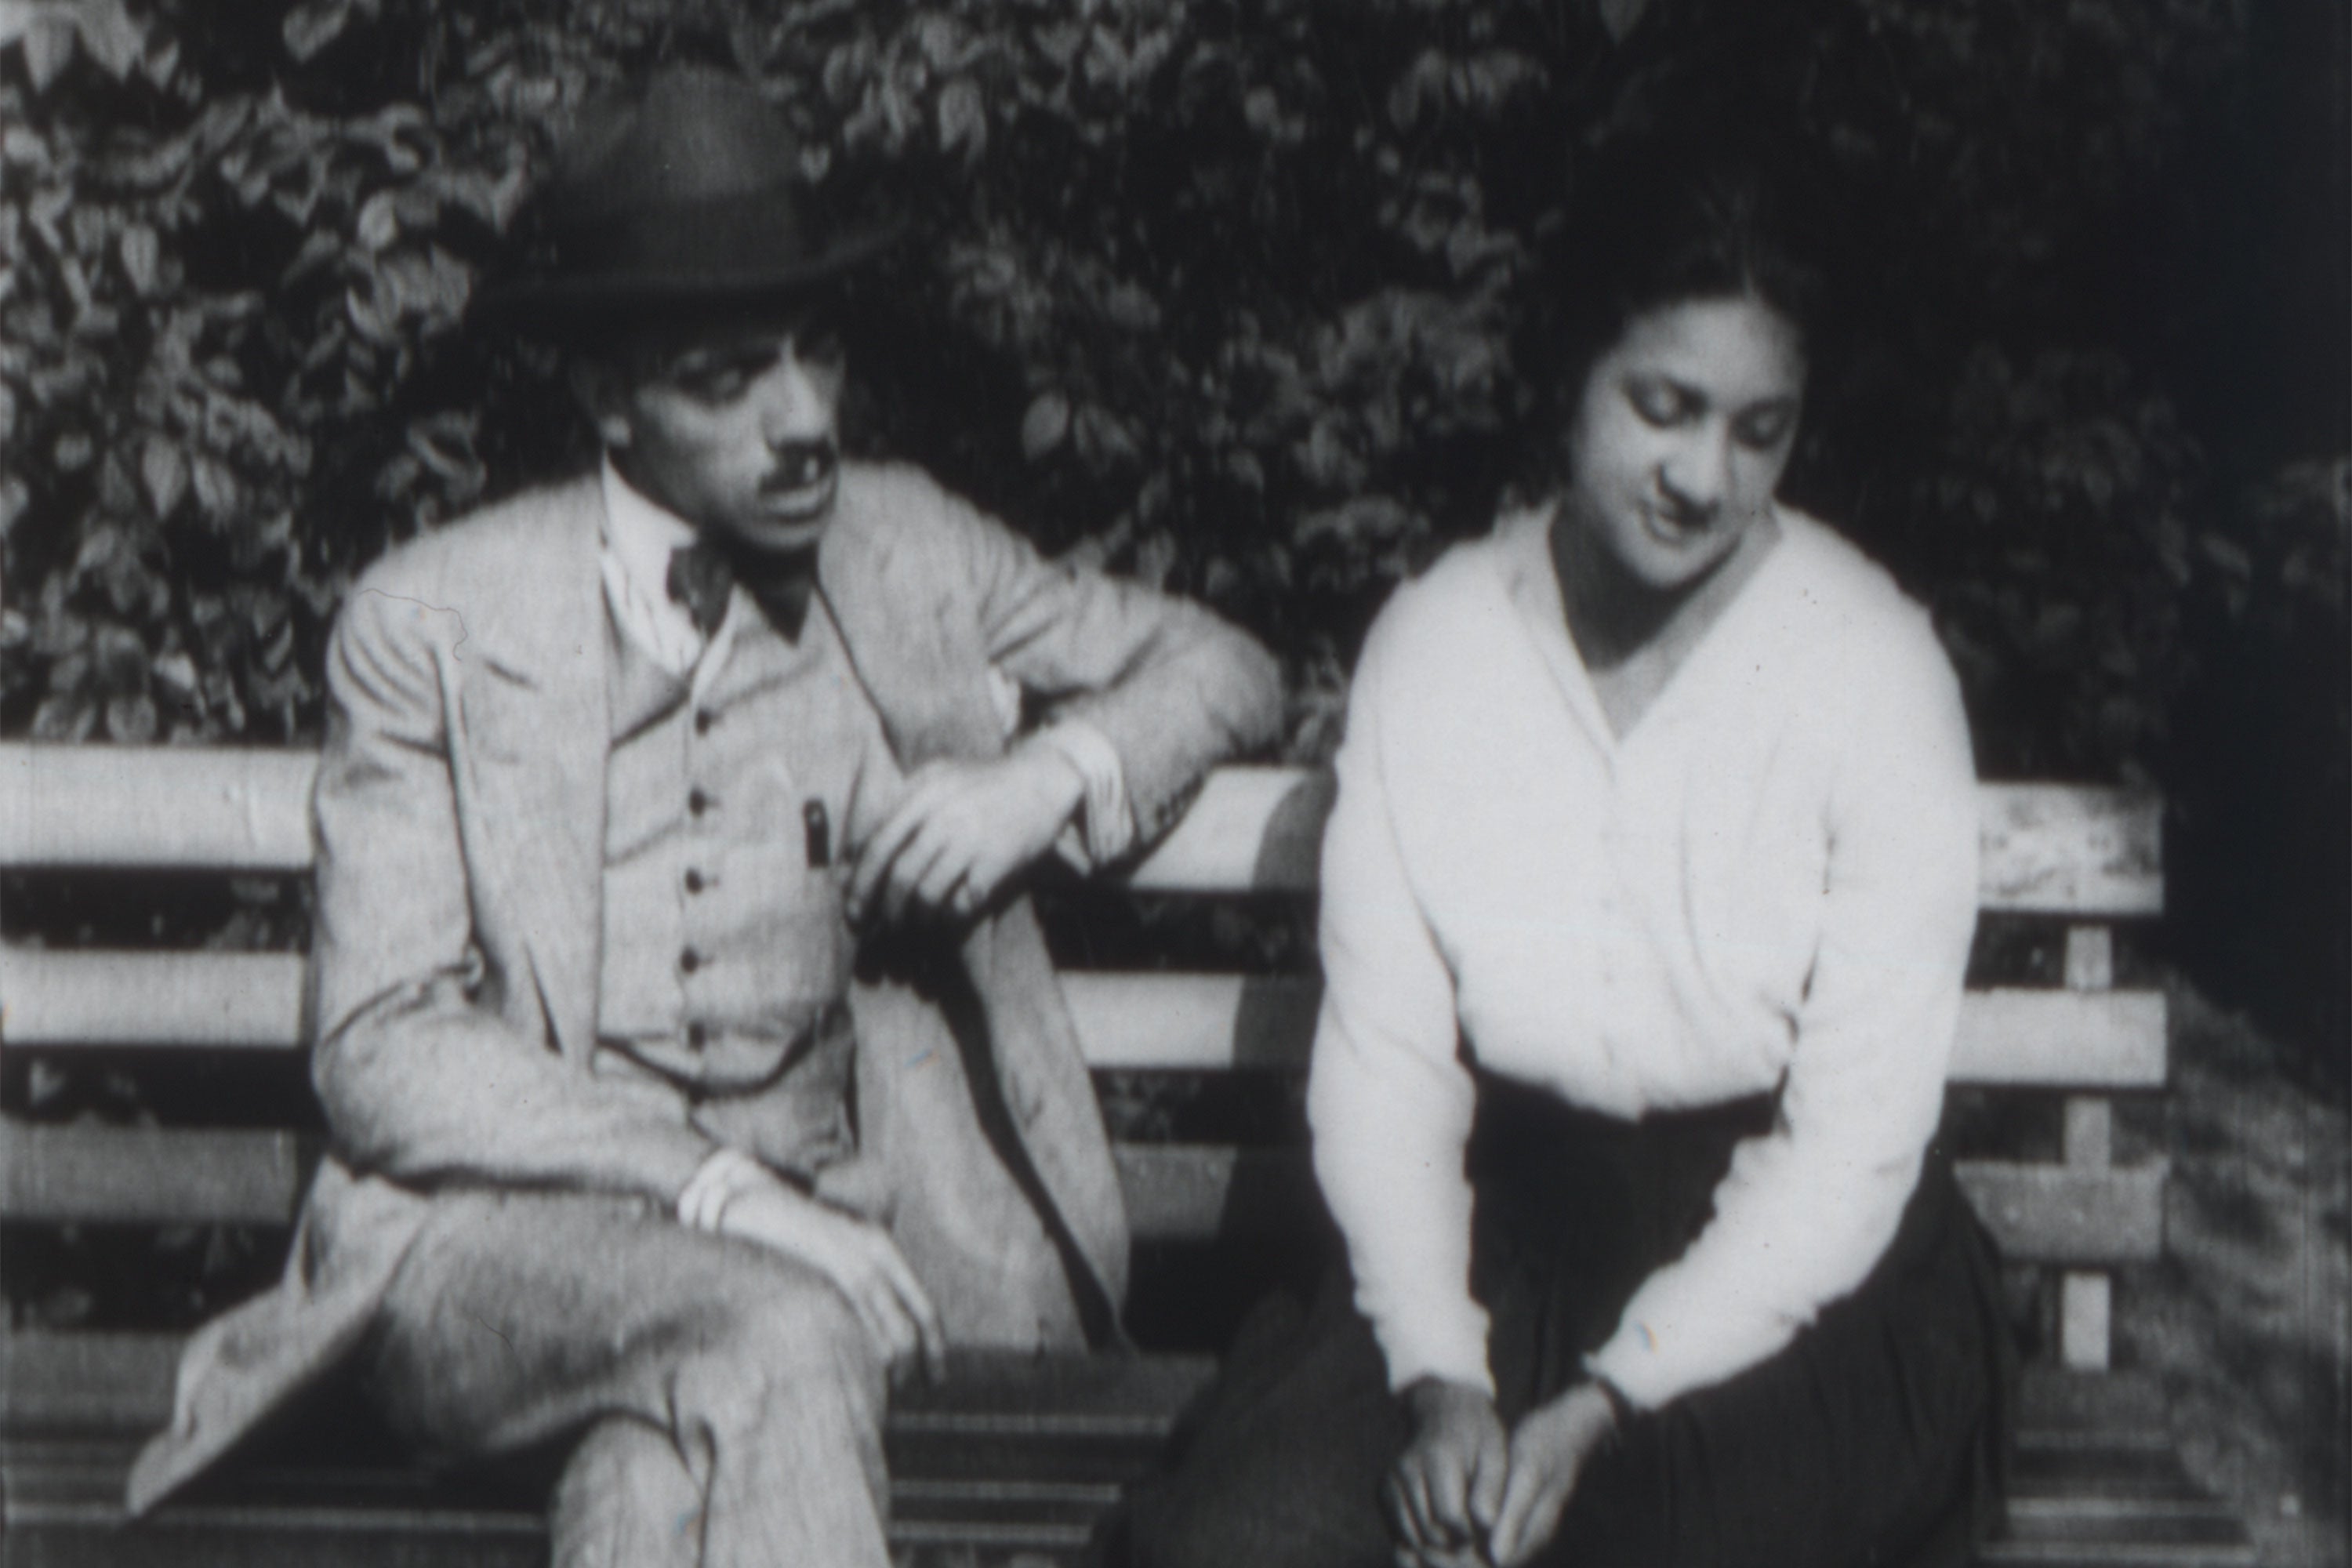 Black and white image of a couple on a bench.